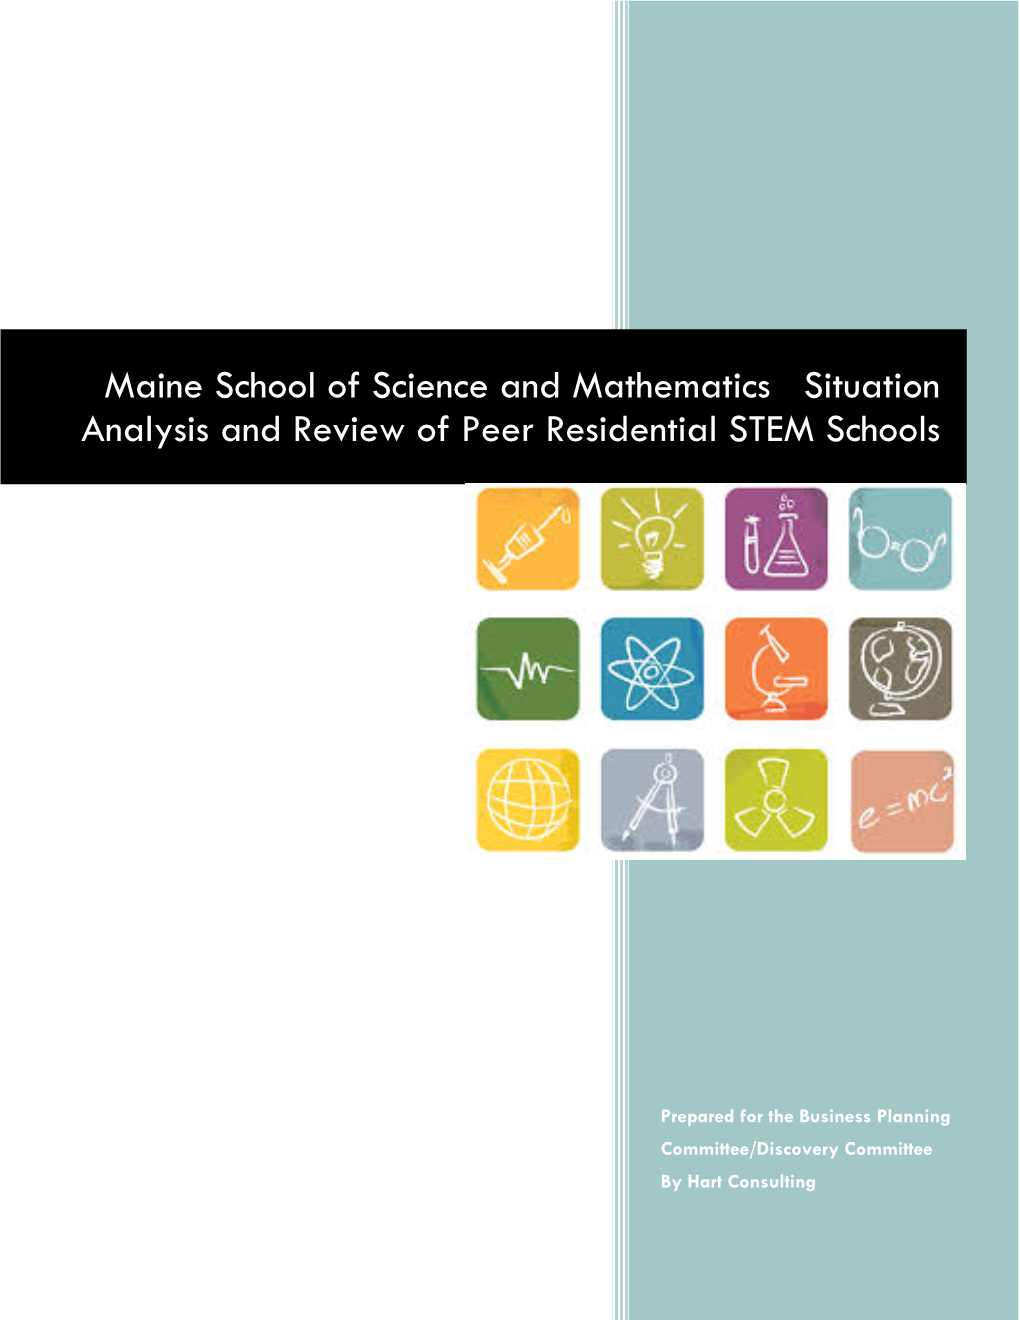 Maine School of Science and Mathematics Situation Analysis and Review of Peer Residential STEM Schools